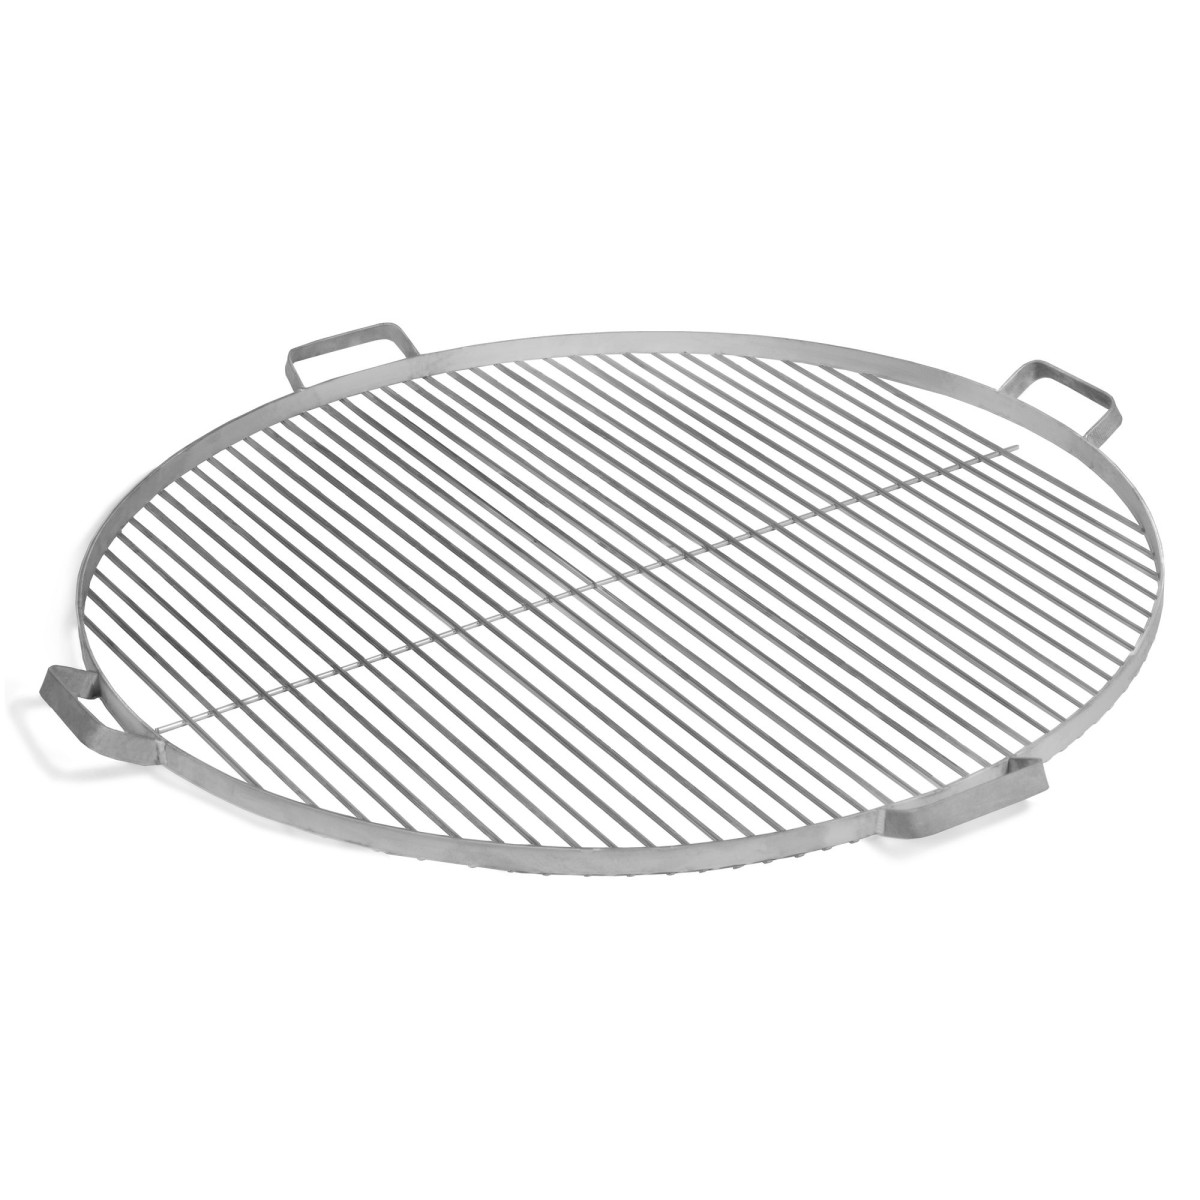 https://www.multitanks.com/6529-thickbox_default/stainless-steel-cooking-grid-from-60-cm-to-80-cm-in-diameter-with-4-handles-to-be-placed-on-brazier.jpg